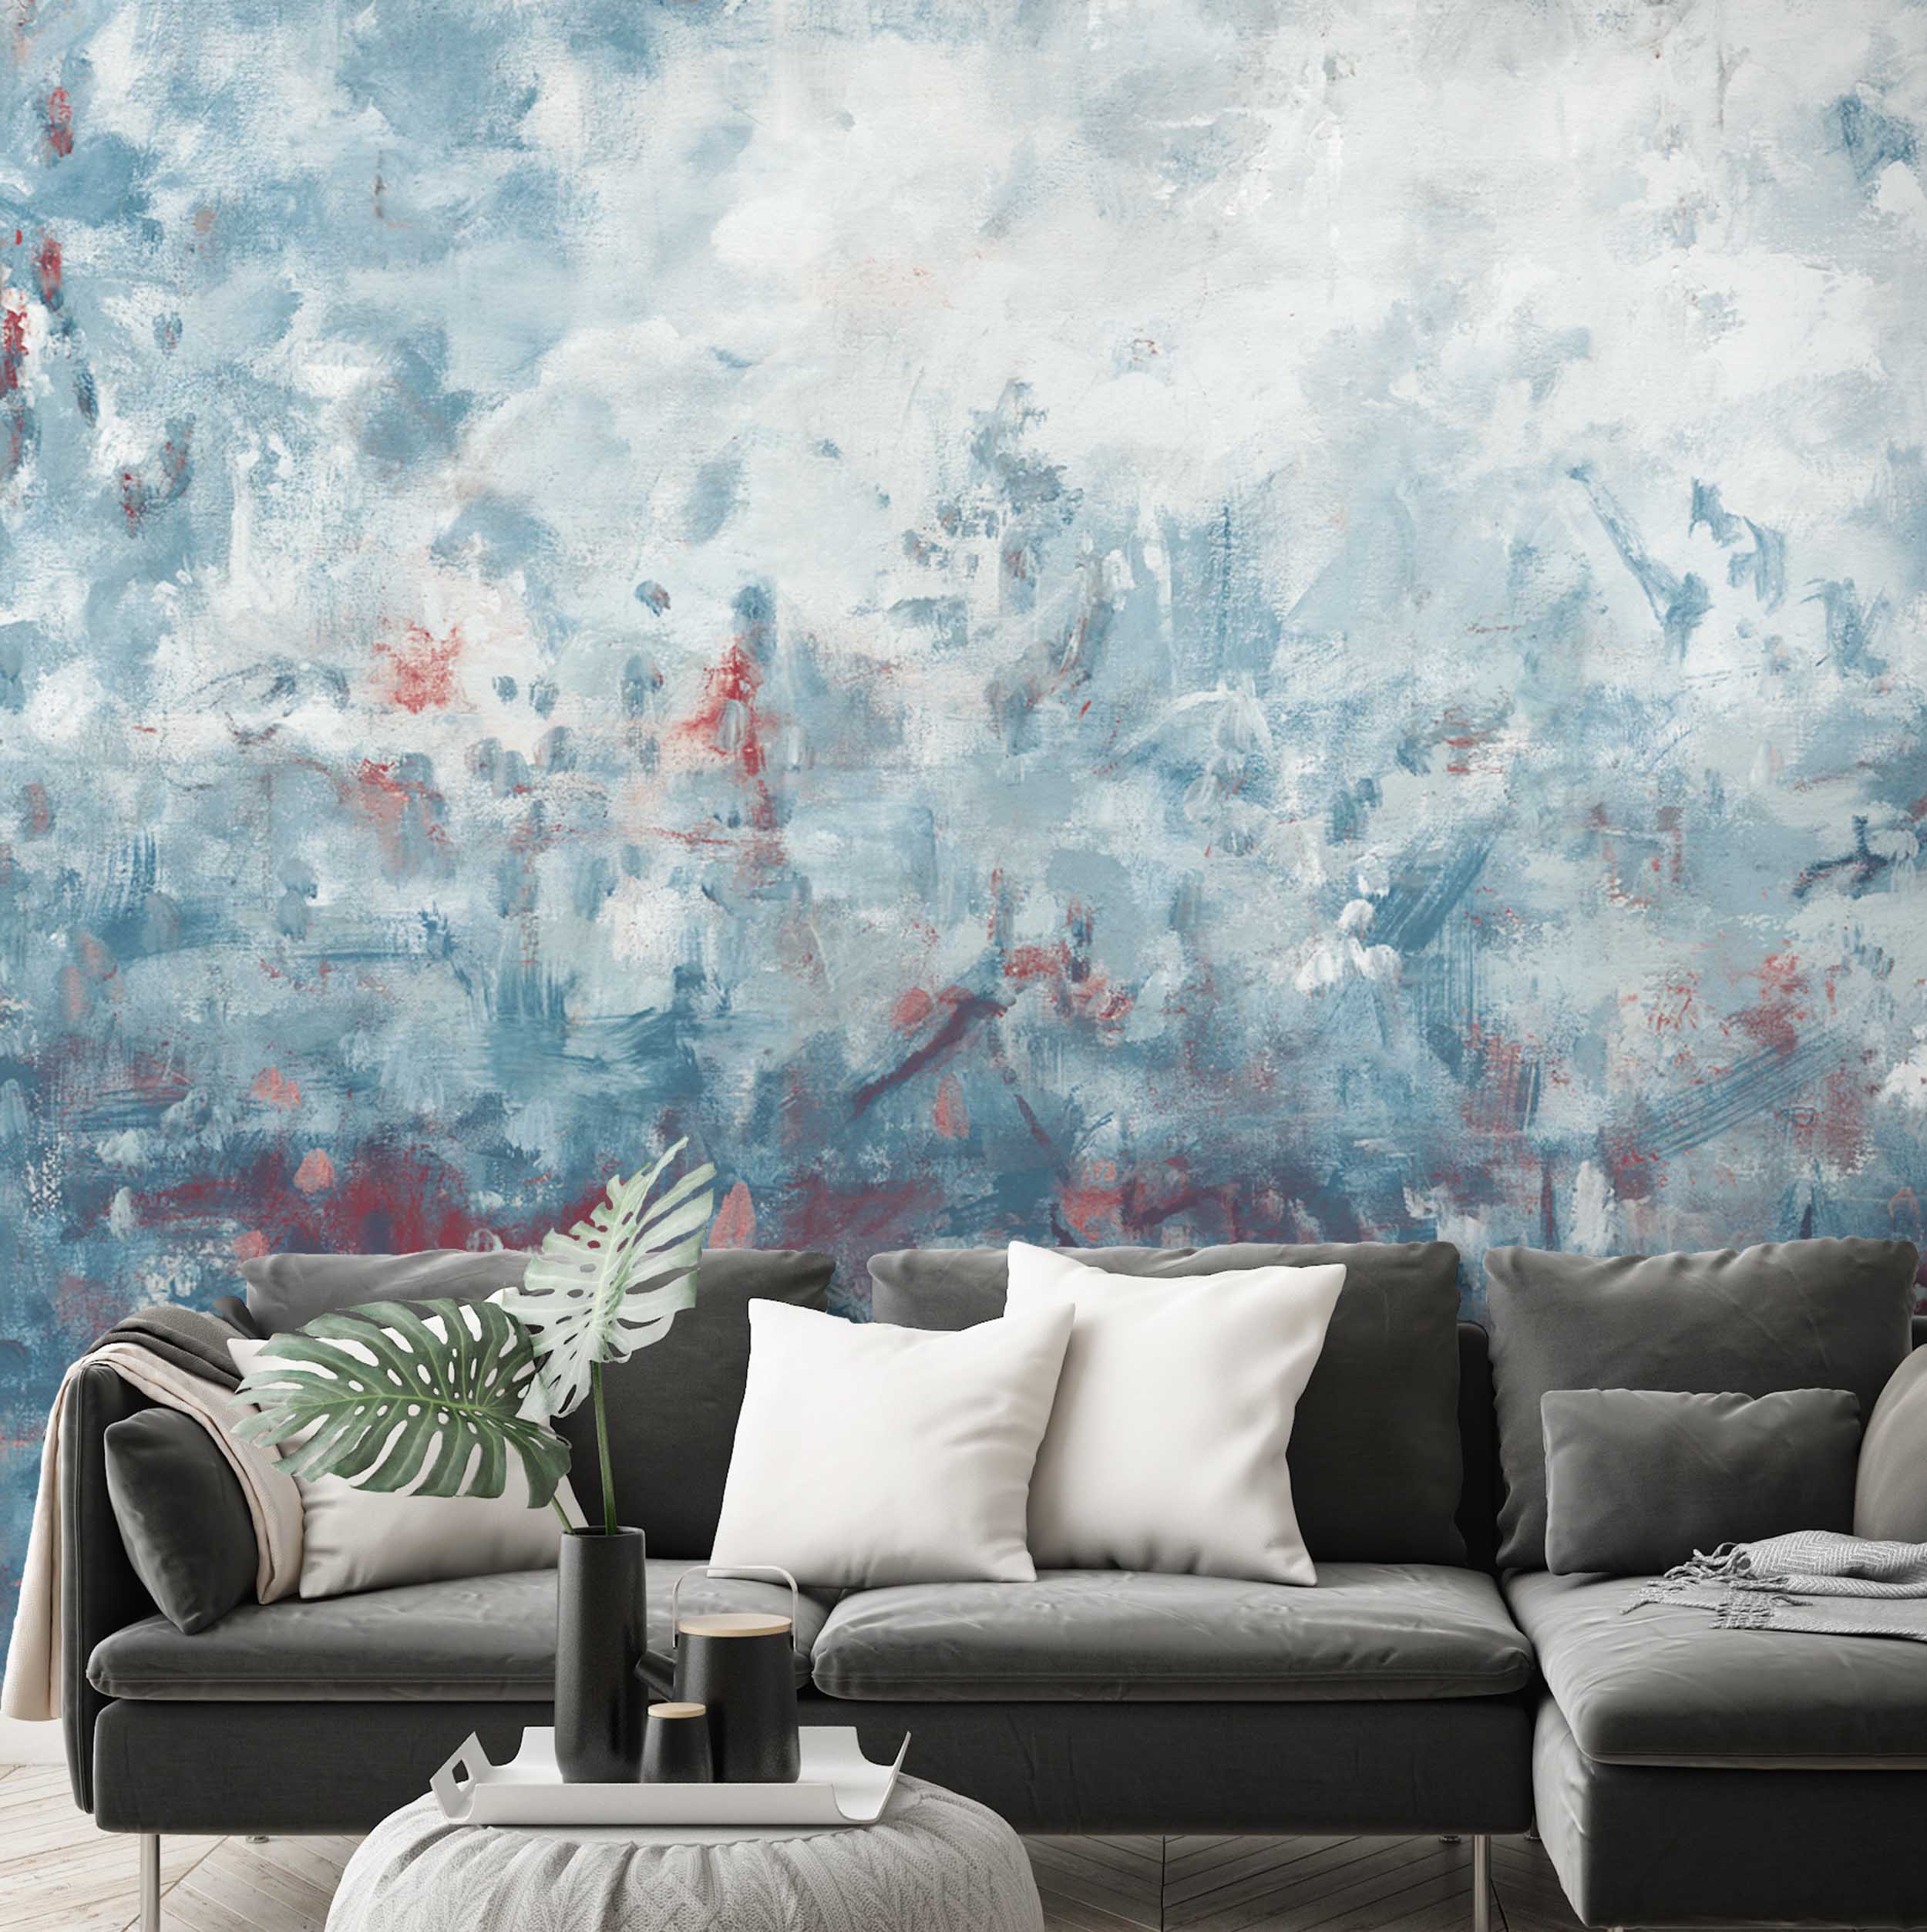 Woodchip & Magnolia S Latest Wallpaper Collections - Dreams Weigh More Than Excuses , HD Wallpaper & Backgrounds